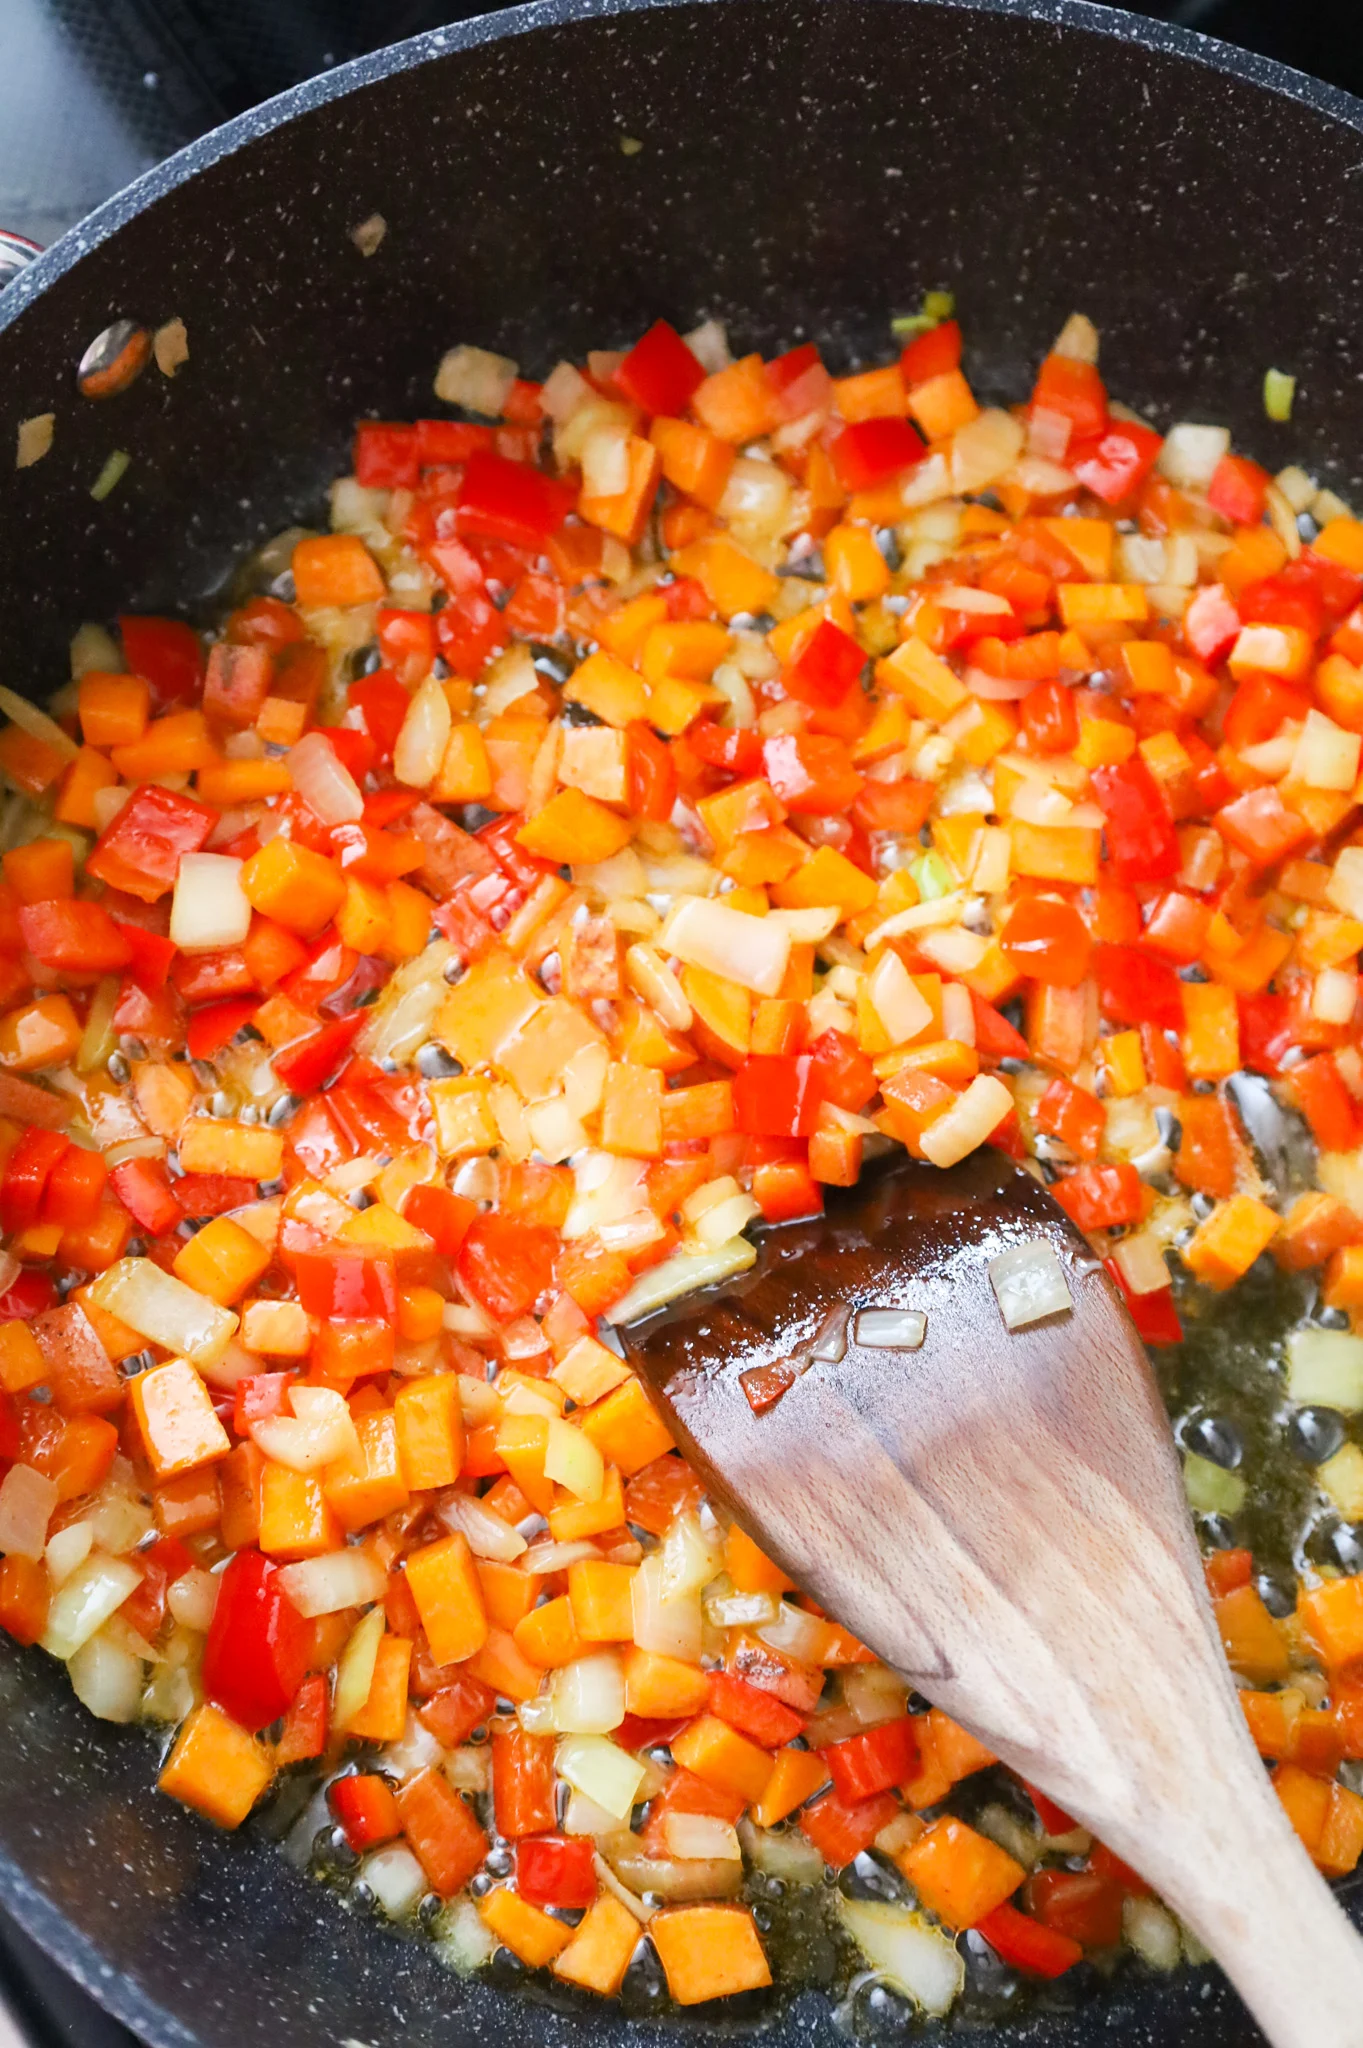 diced onions, peppers and sweet potatoes cooking in a bacon grease in a skillet